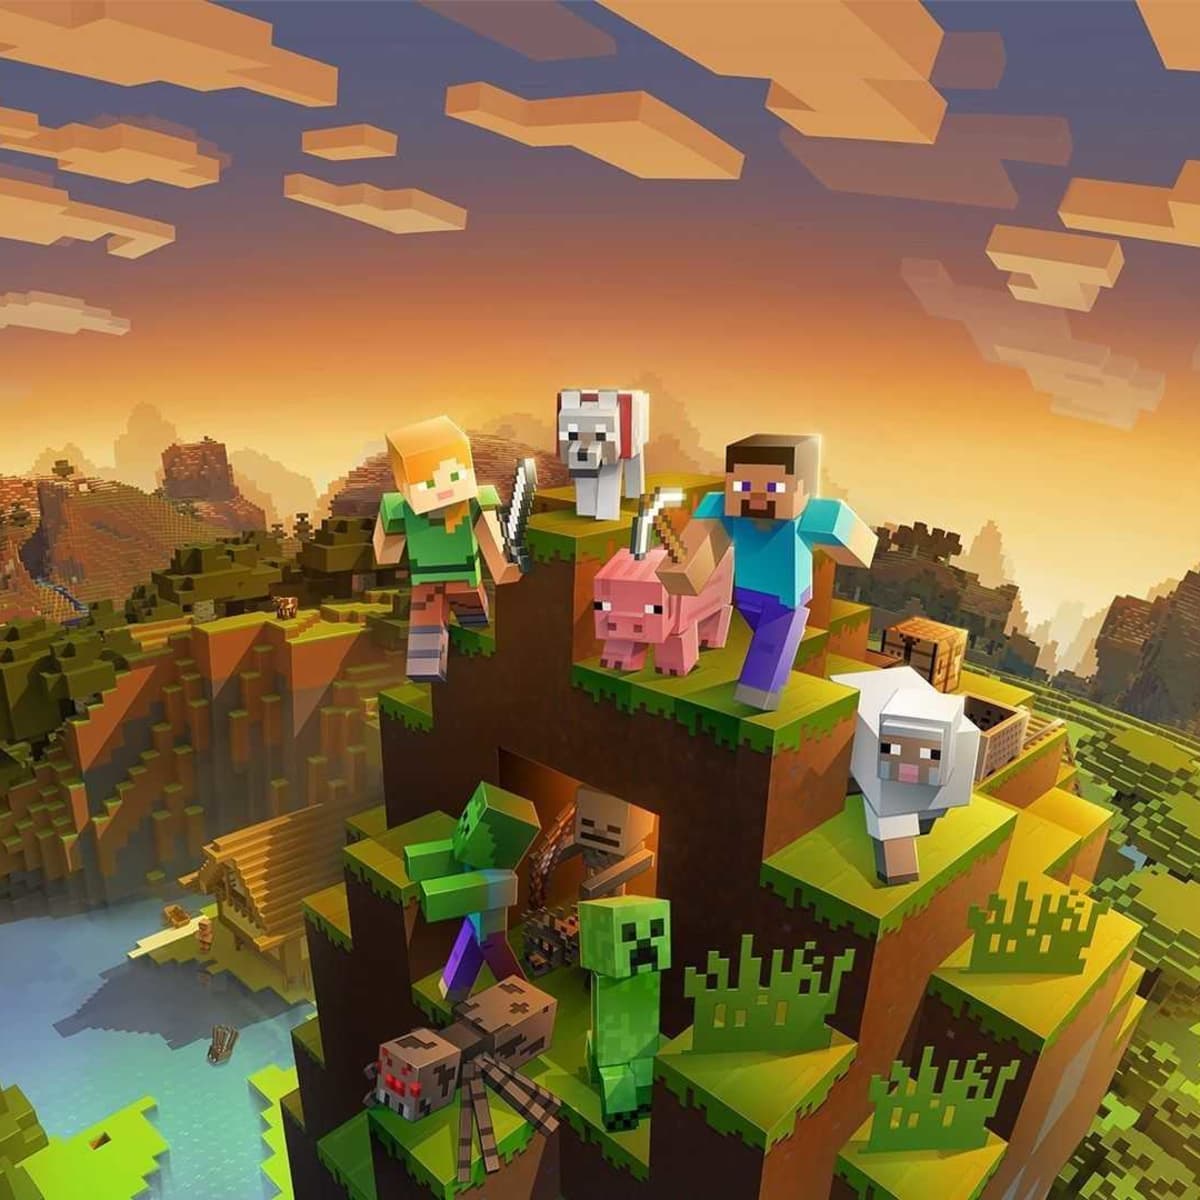 Roblox: The booming video game that's now bigger than Minecraft – The Irish  Times